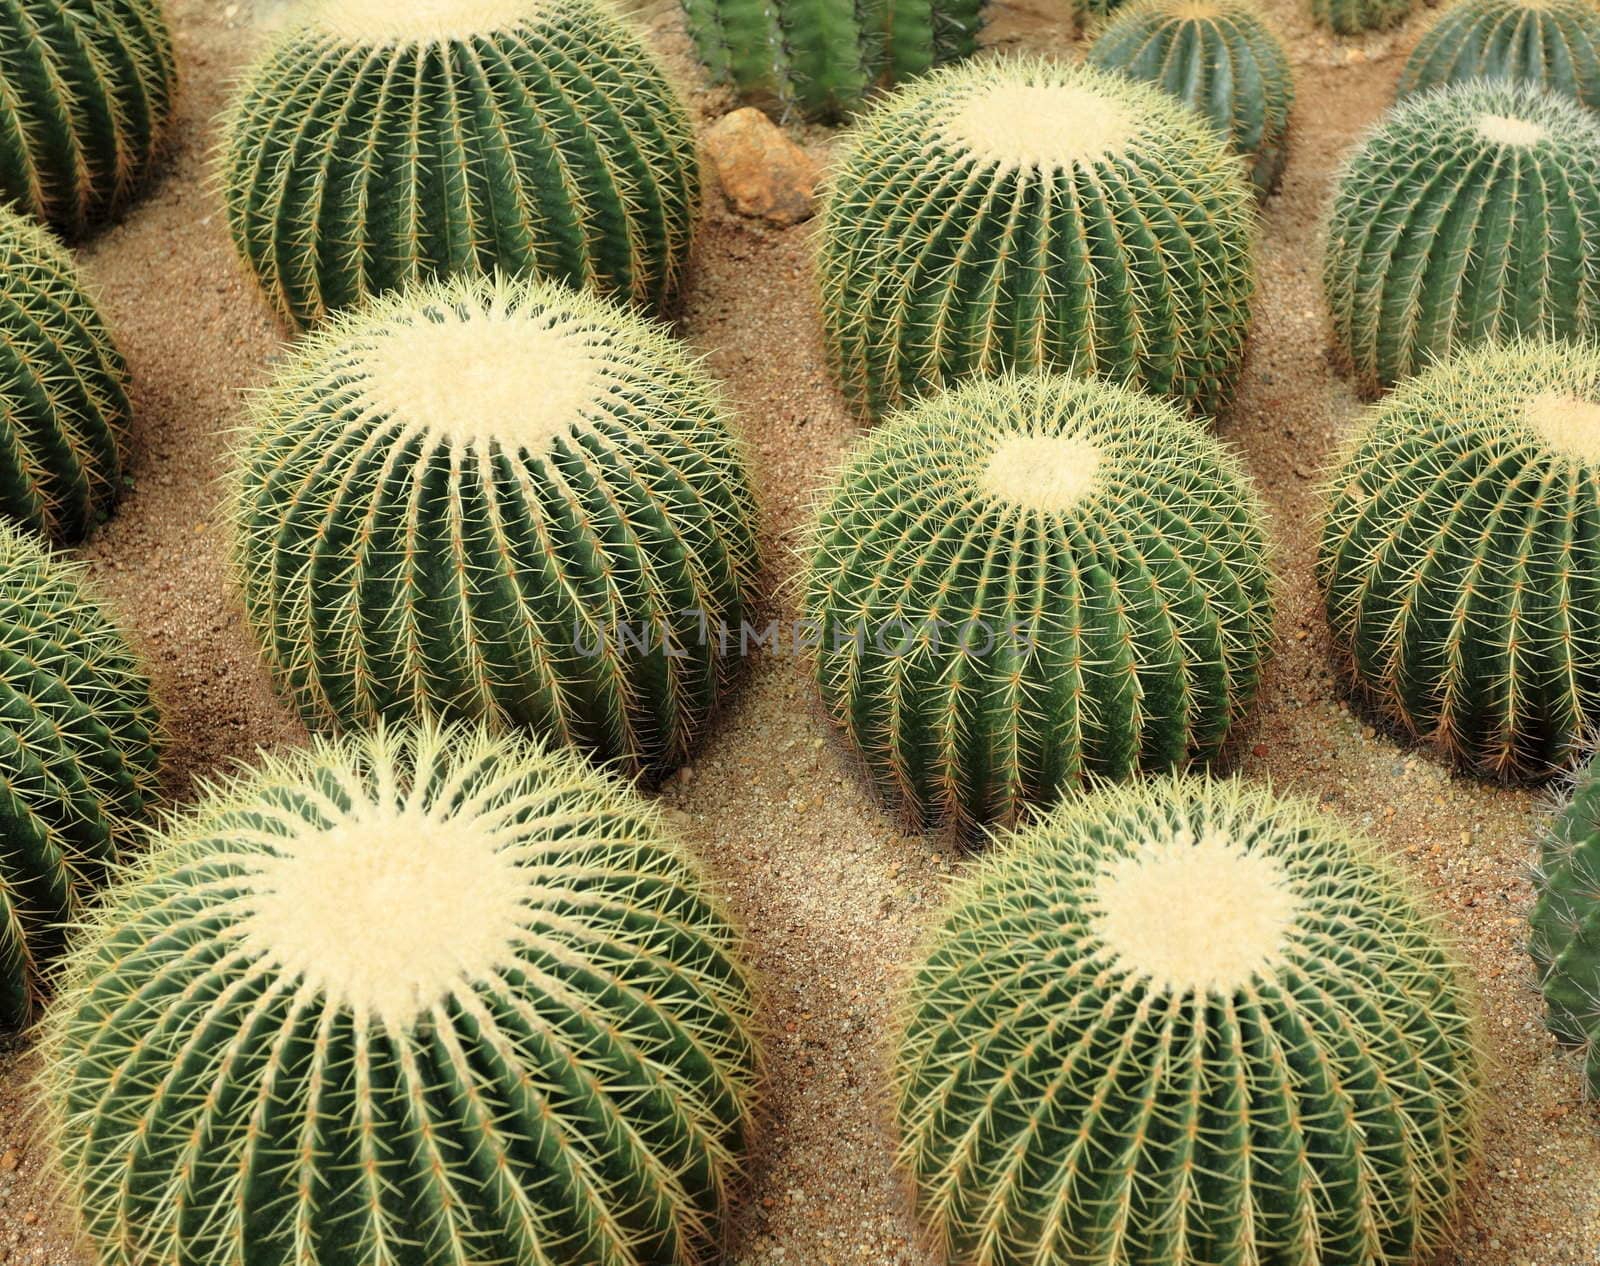 many cactaceae by leungchopan